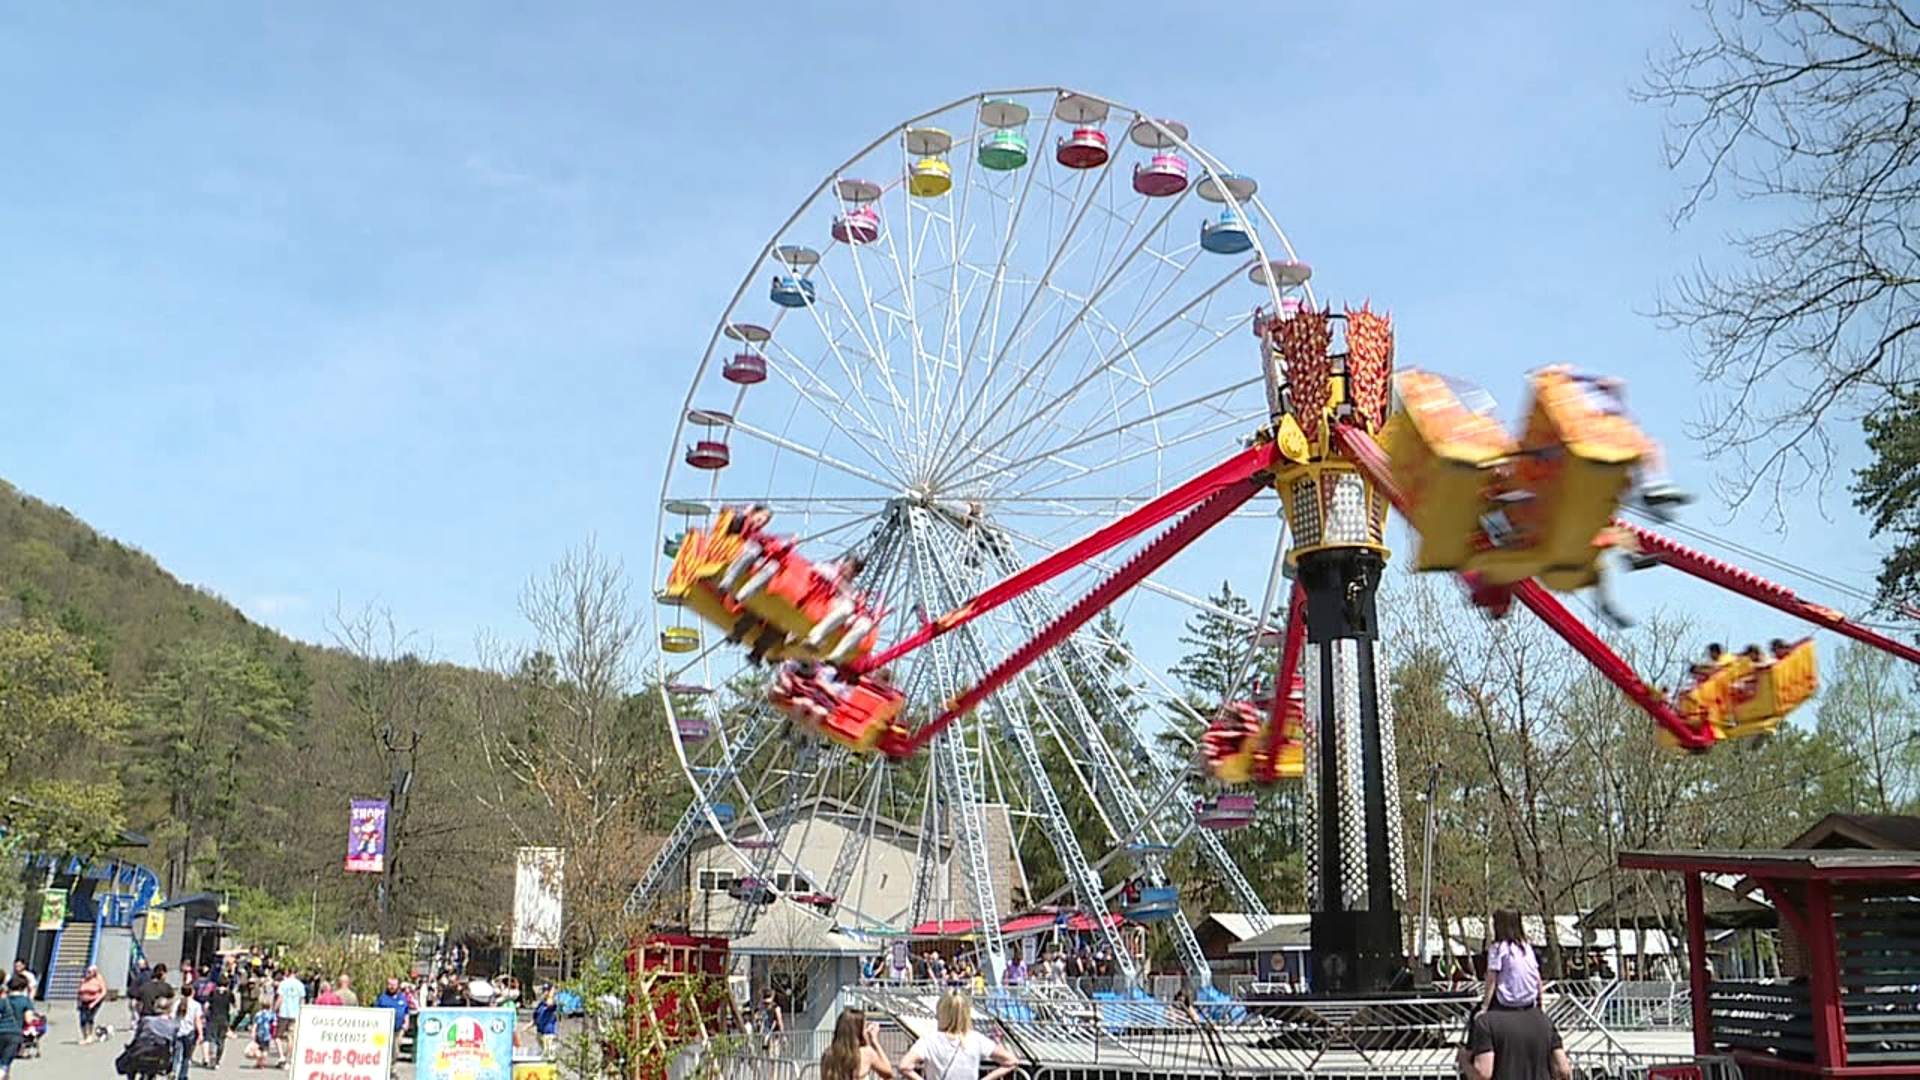 A popular amusement park in Northumberland County welcomed hundreds of families for a day of food and thrills.